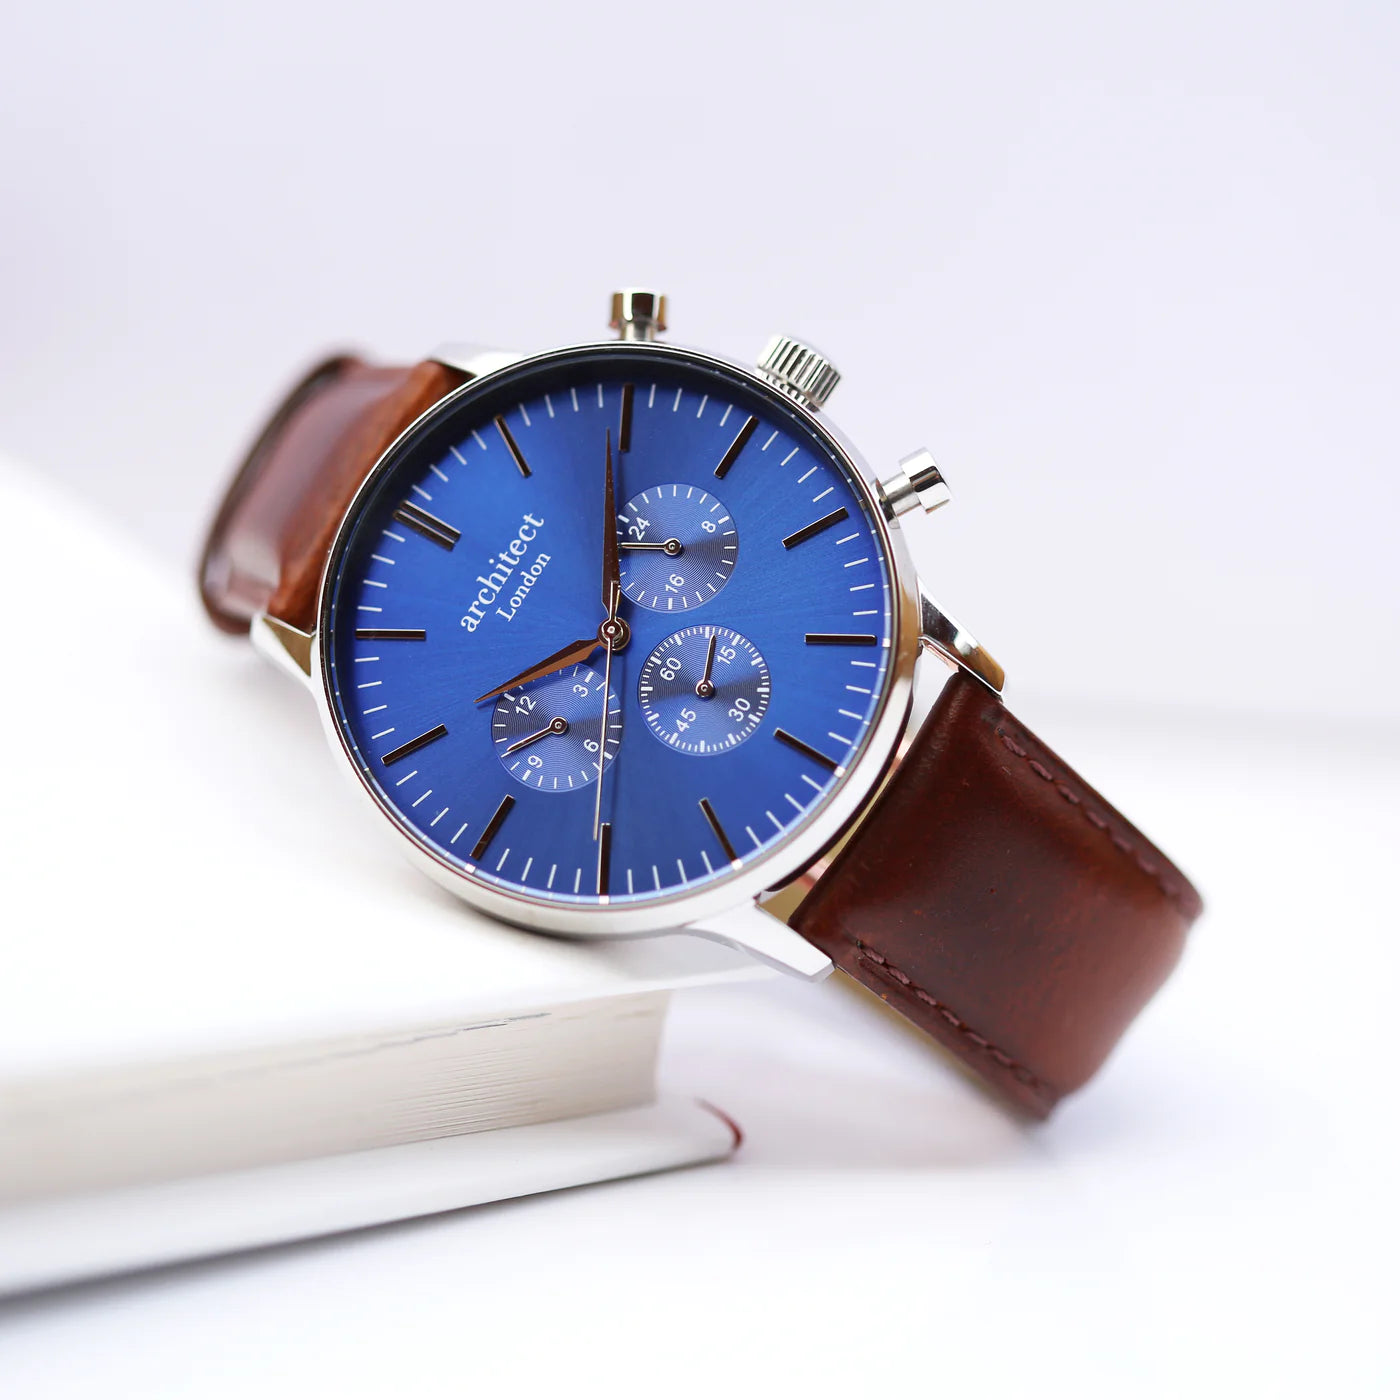 Image of a men's Architect Motivator watch that can be engraved with your own handwritten message on the back. The watch has a face and a brown leather strap.